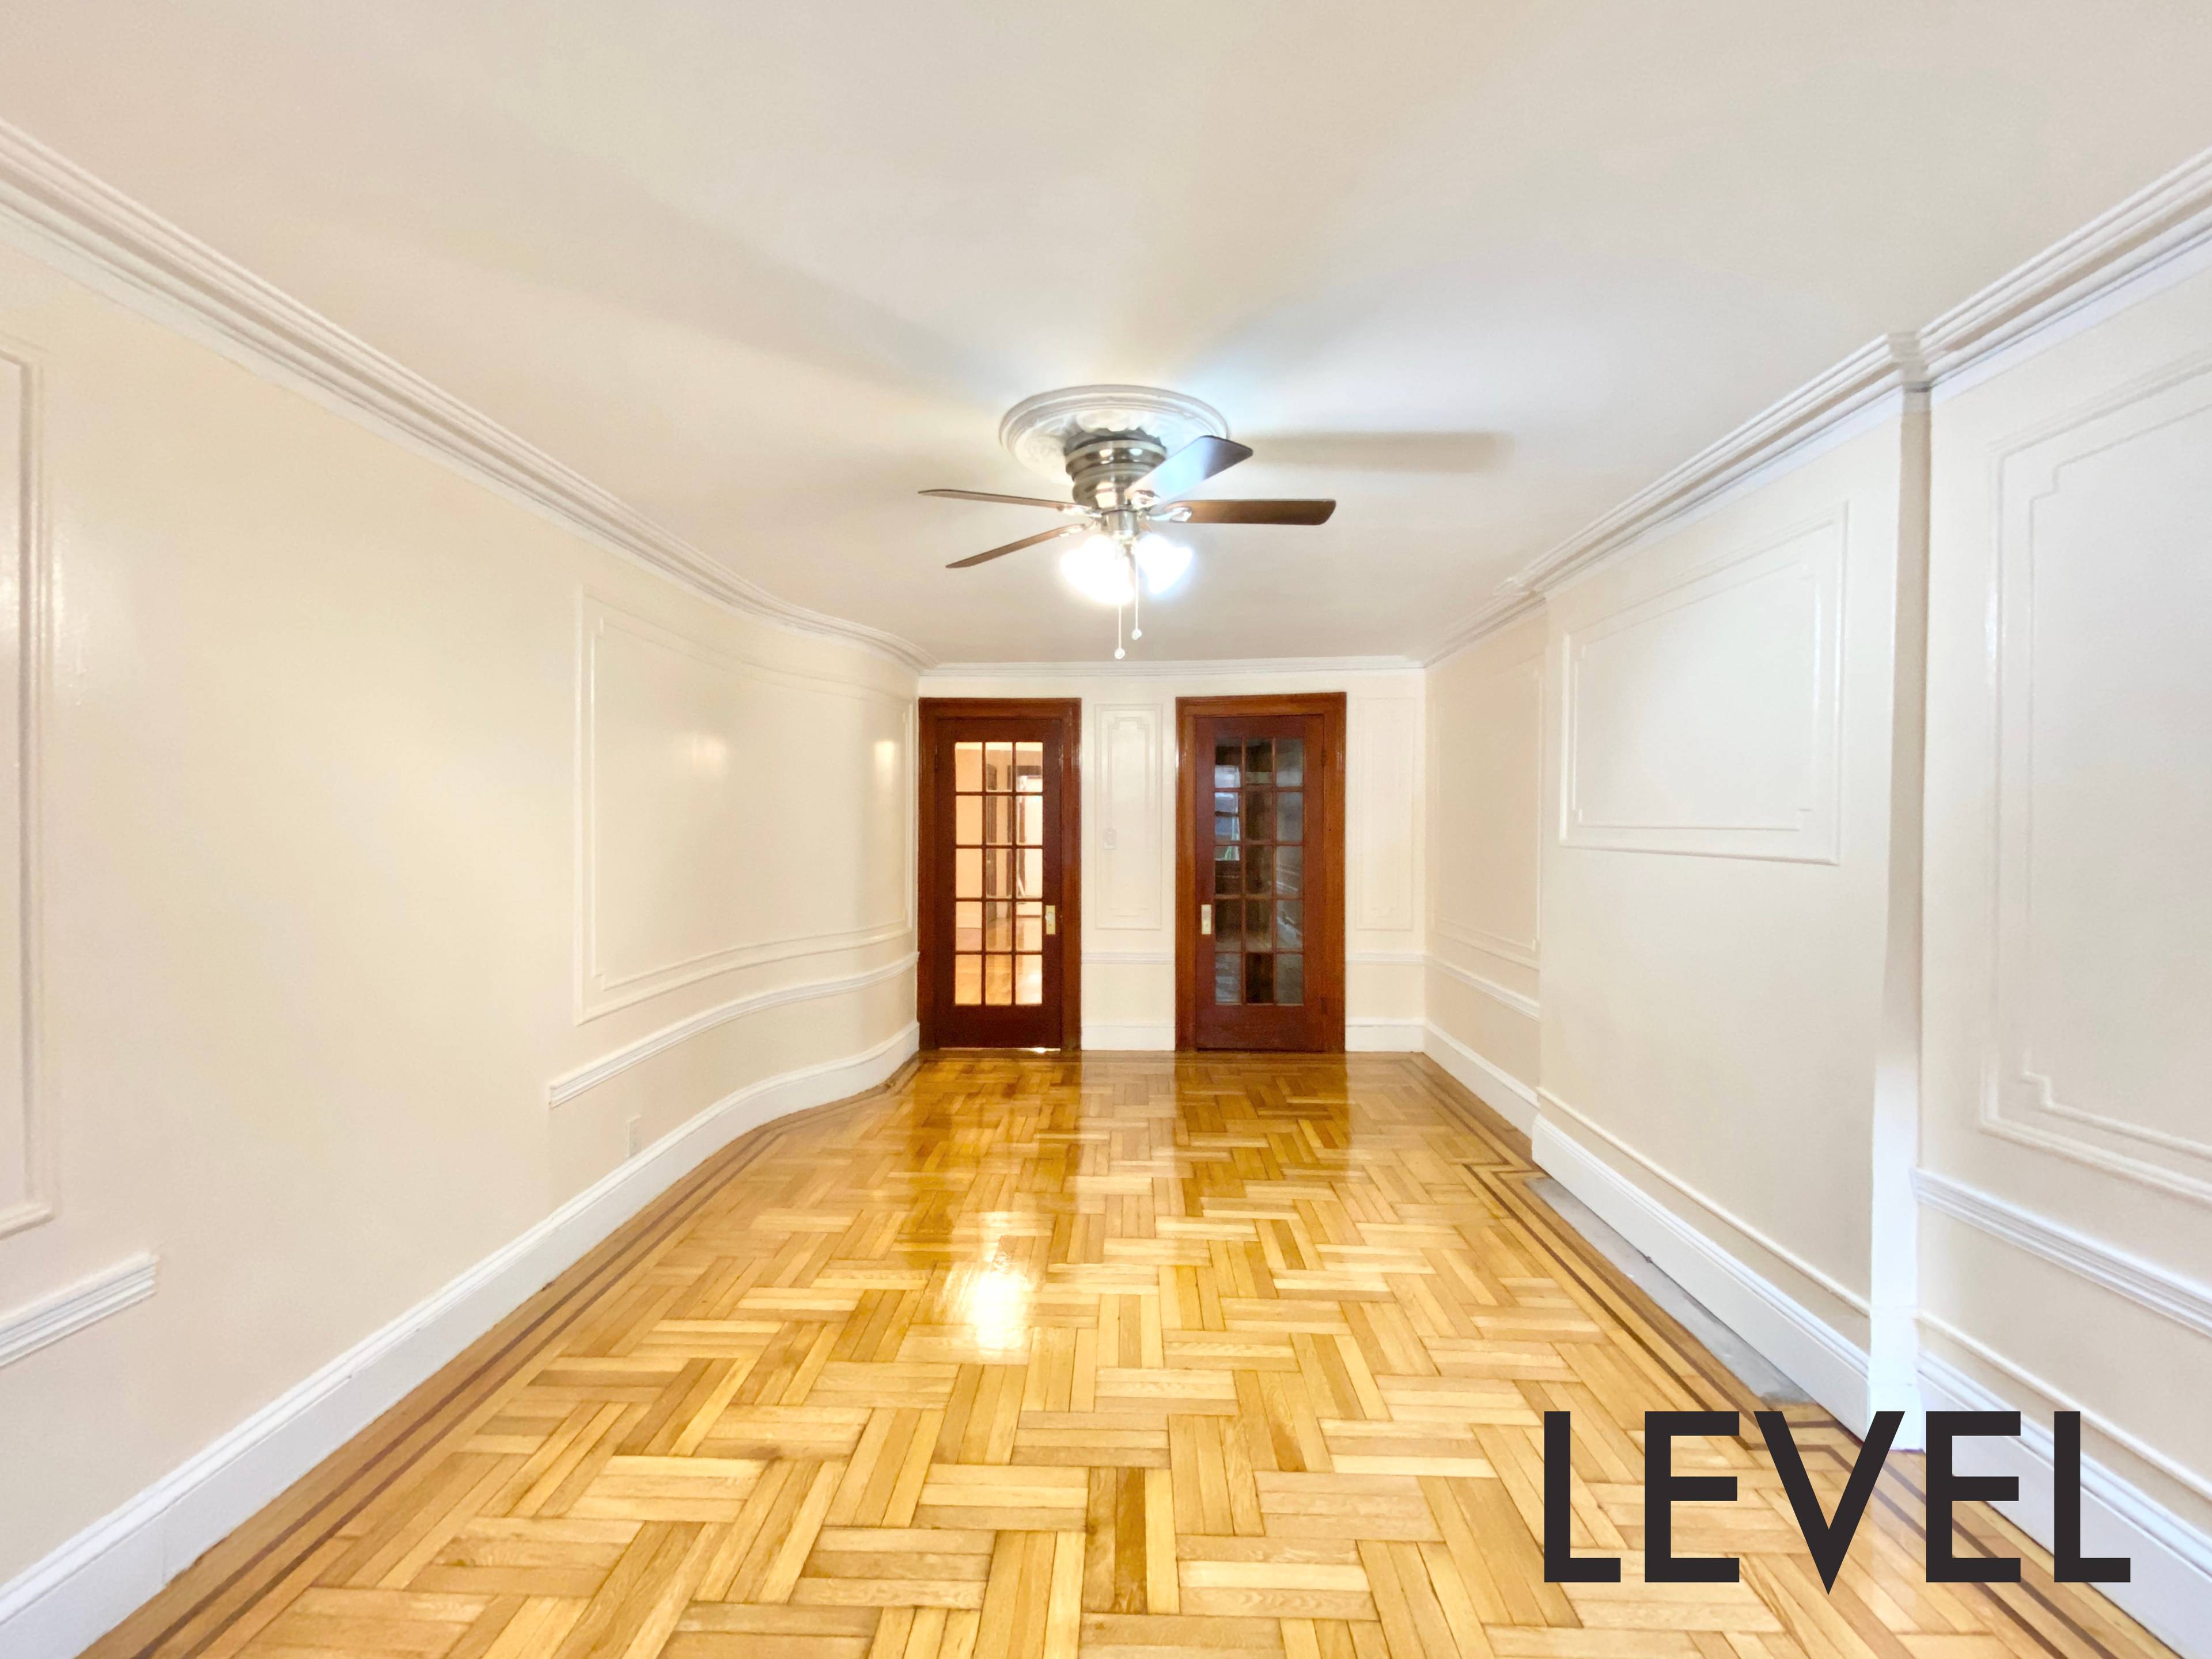 A rarity in this area a 1, 350 SF 2BR 2BA garden duplex with private outdoor space and on site laundry in northern Park Slope !